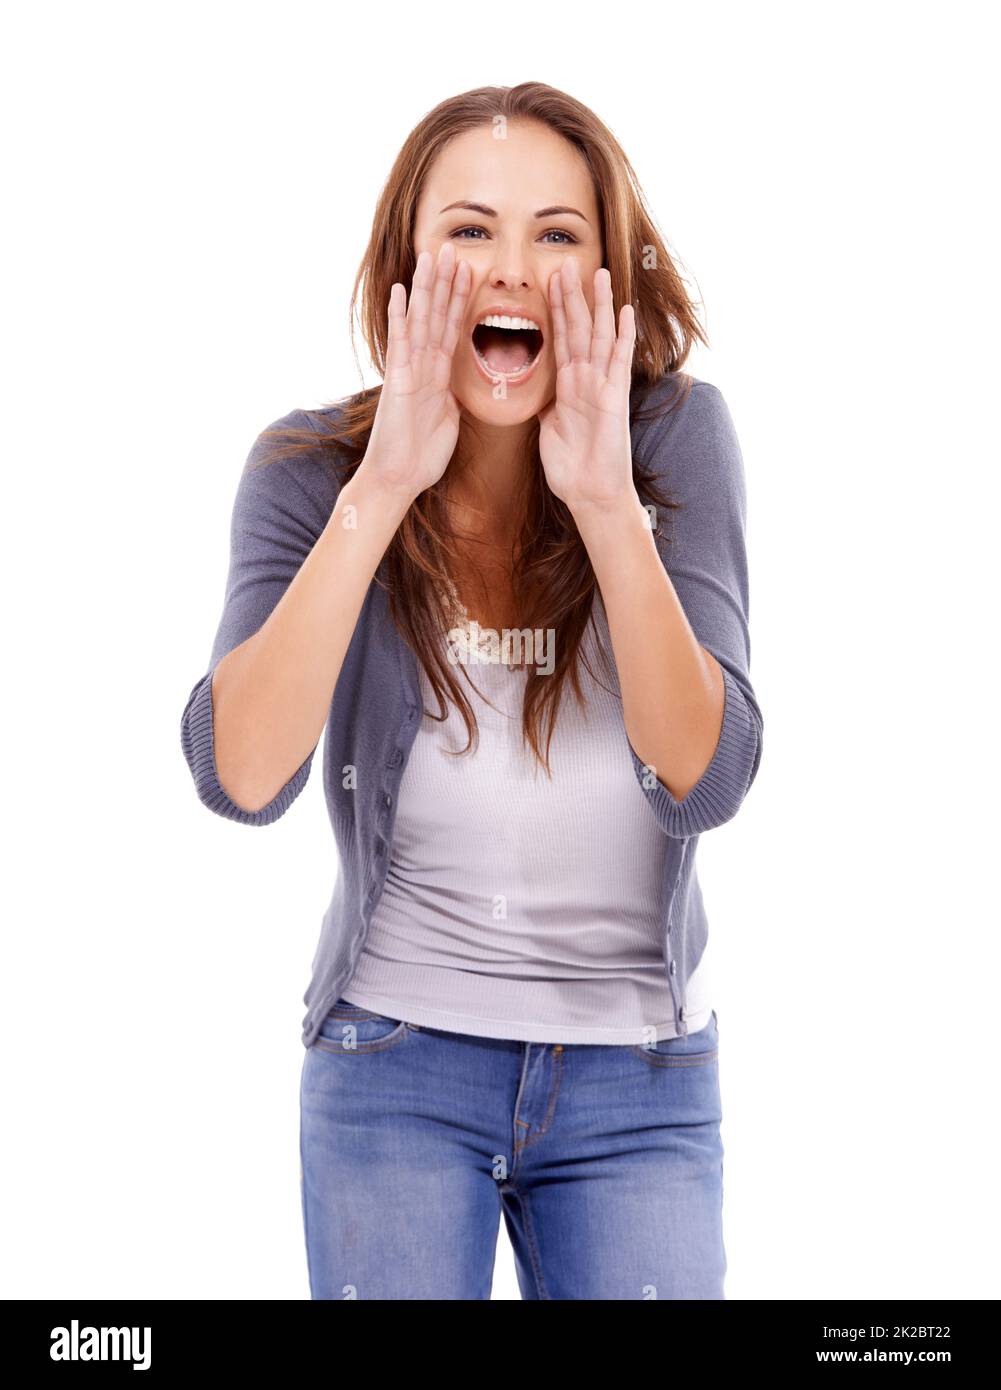 Hey over there. Casually dressed woman yelling loudly isolated on white. Stock Photo